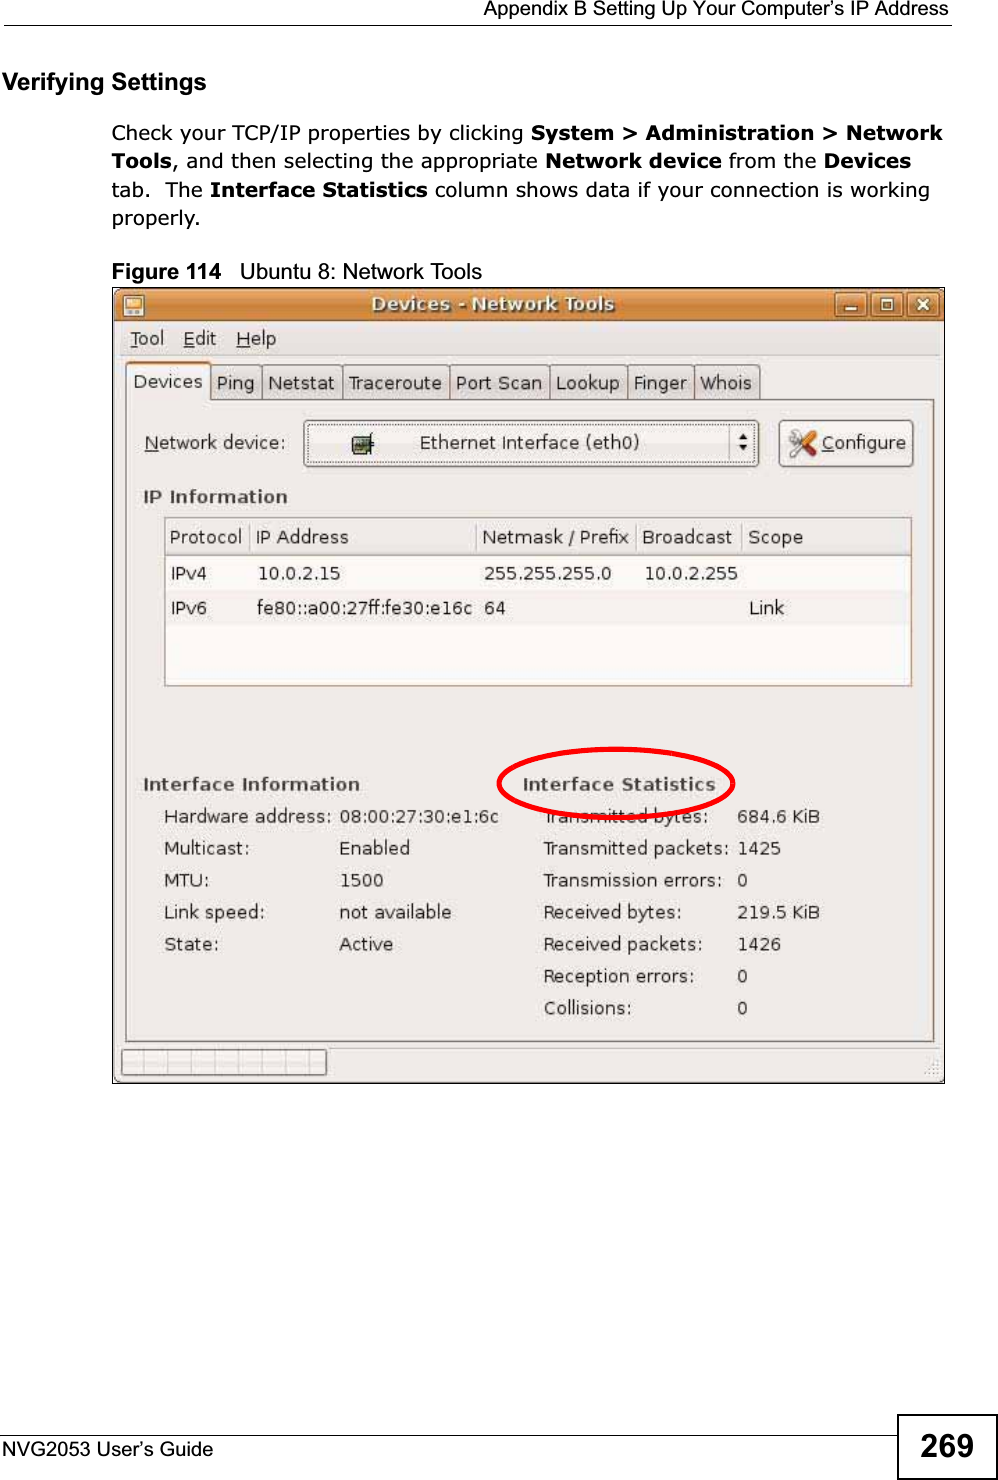  Appendix B Setting Up Your Computer’s IP AddressNVG2053 User’s Guide 269Verifying SettingsCheck your TCP/IP properties by clicking System &gt; Administration &gt; Network Tools, and then selecting the appropriate Network device from the Devicestab.  The Interface Statistics column shows data if your connection is working properly.Figure 114   Ubuntu 8: Network Tools